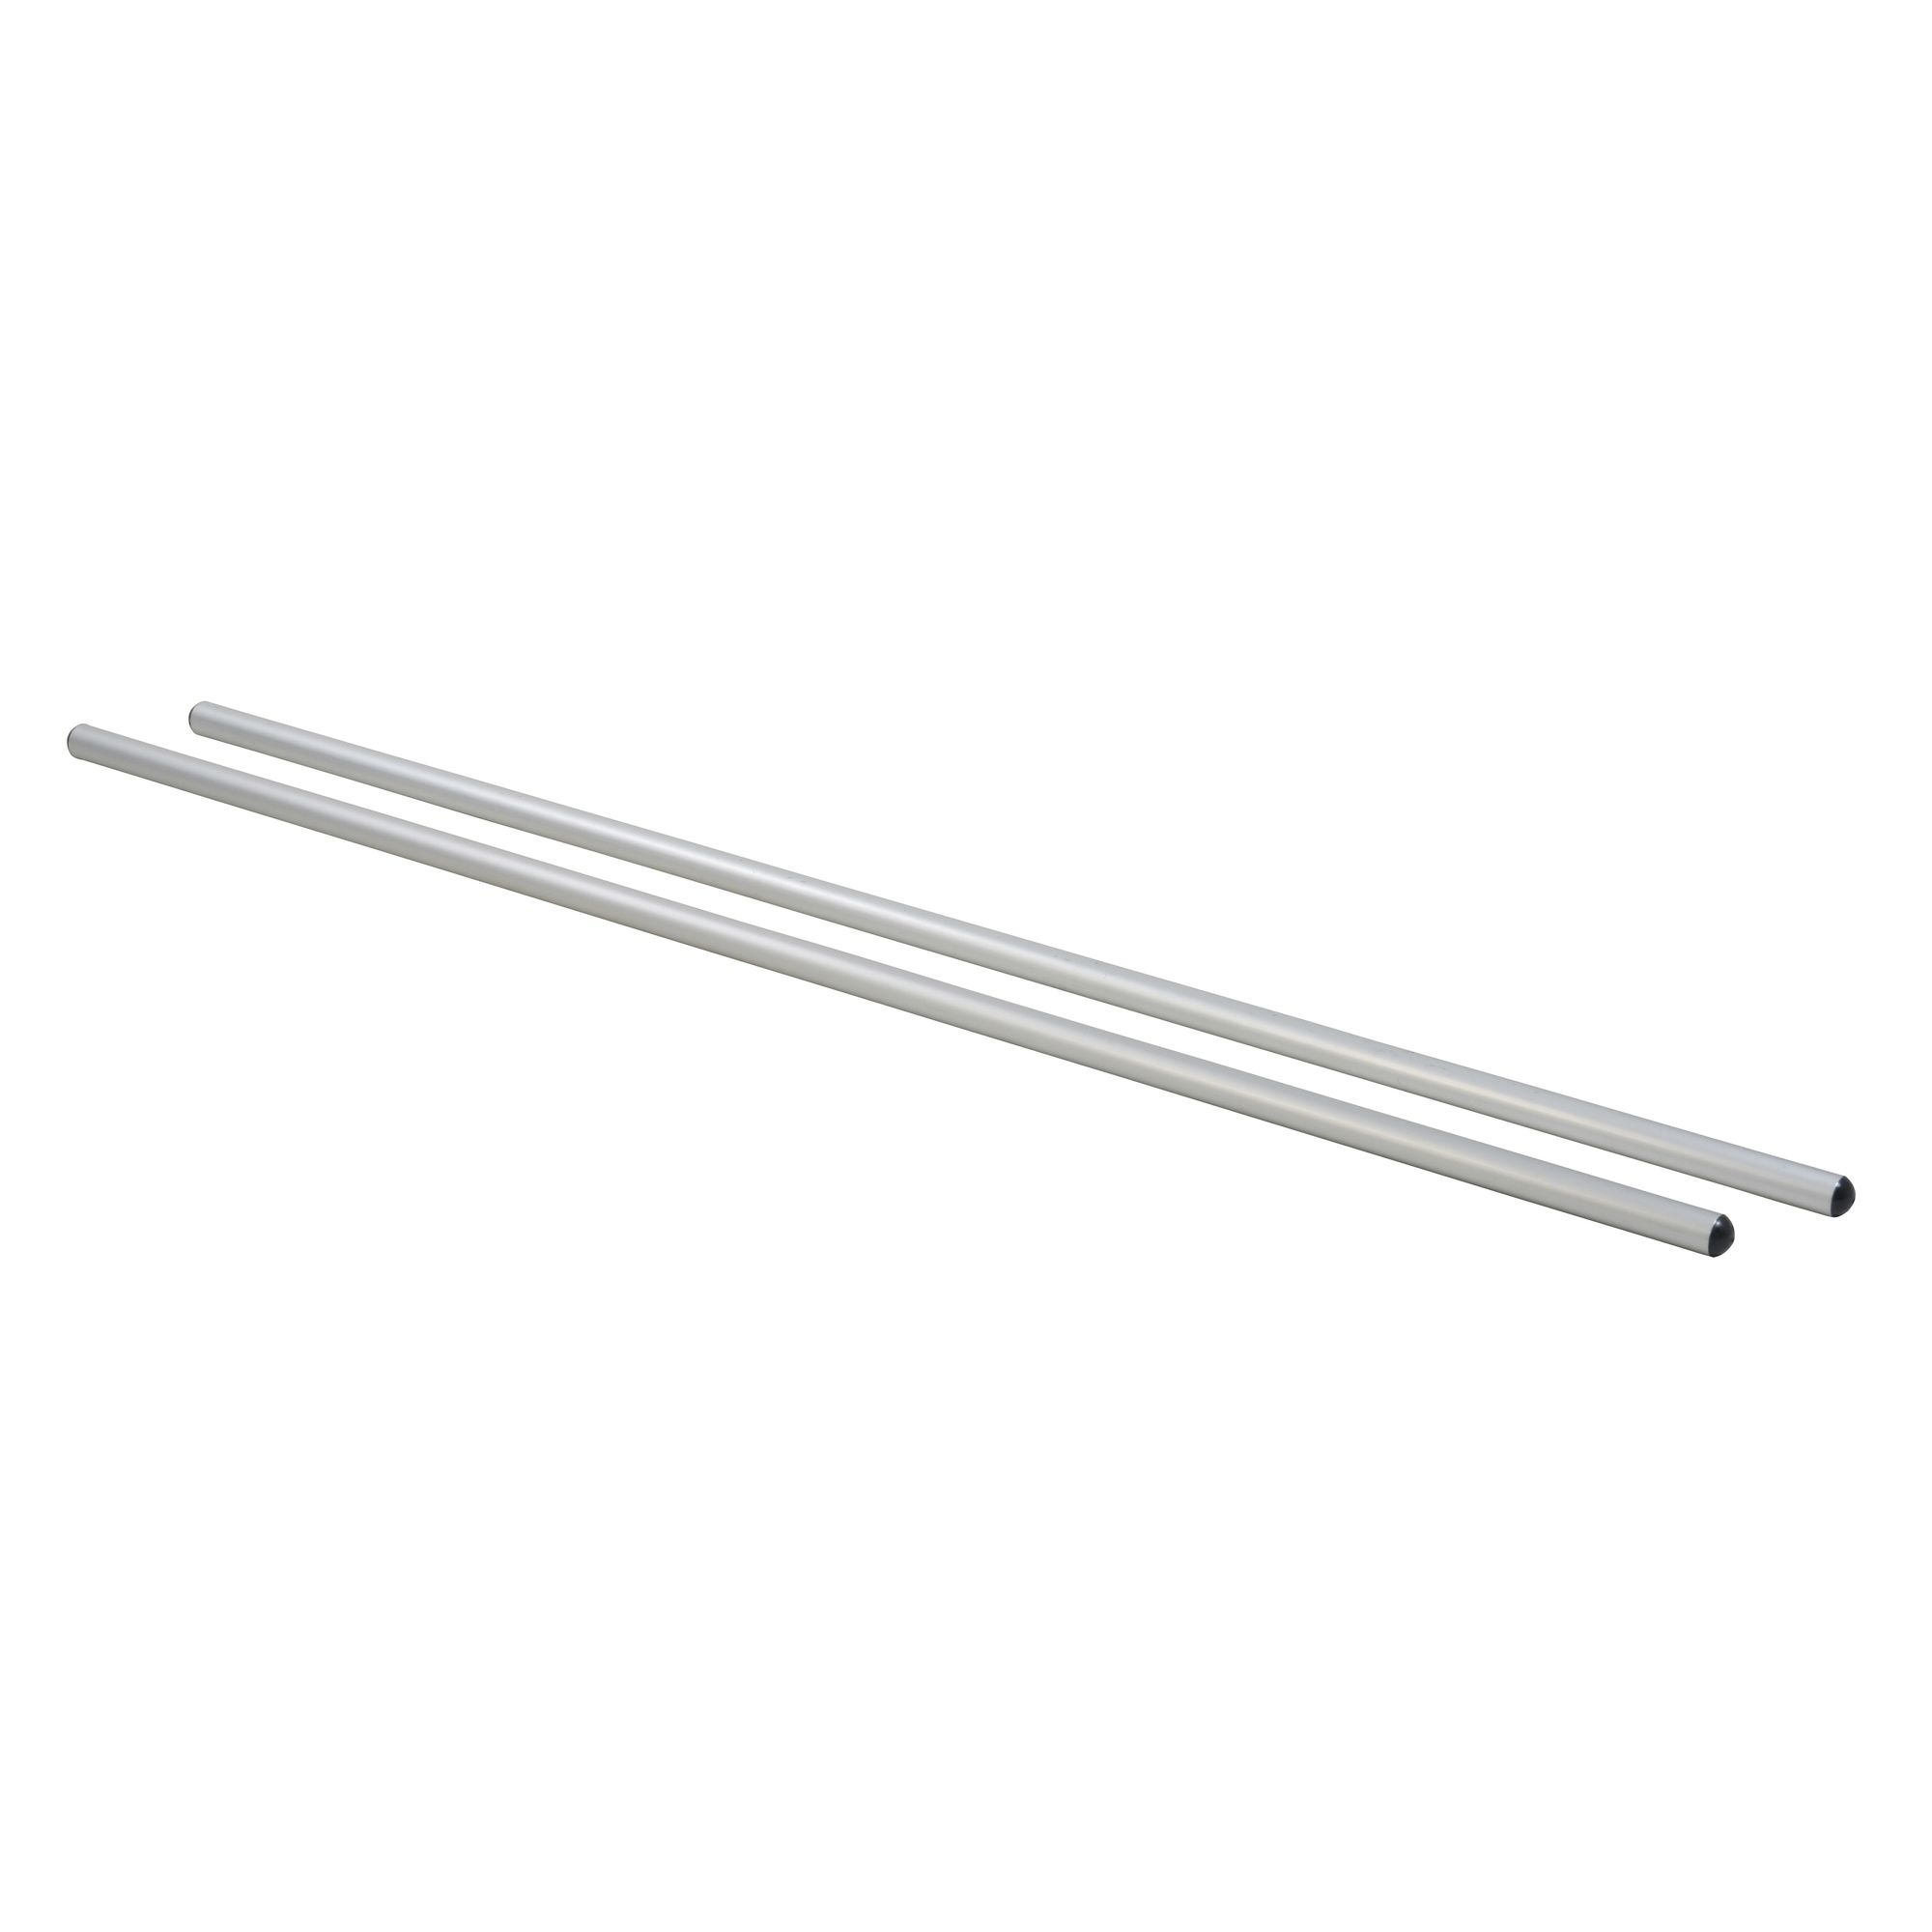 NRS NRS Frame Side Rails with Plugs - Set of 2